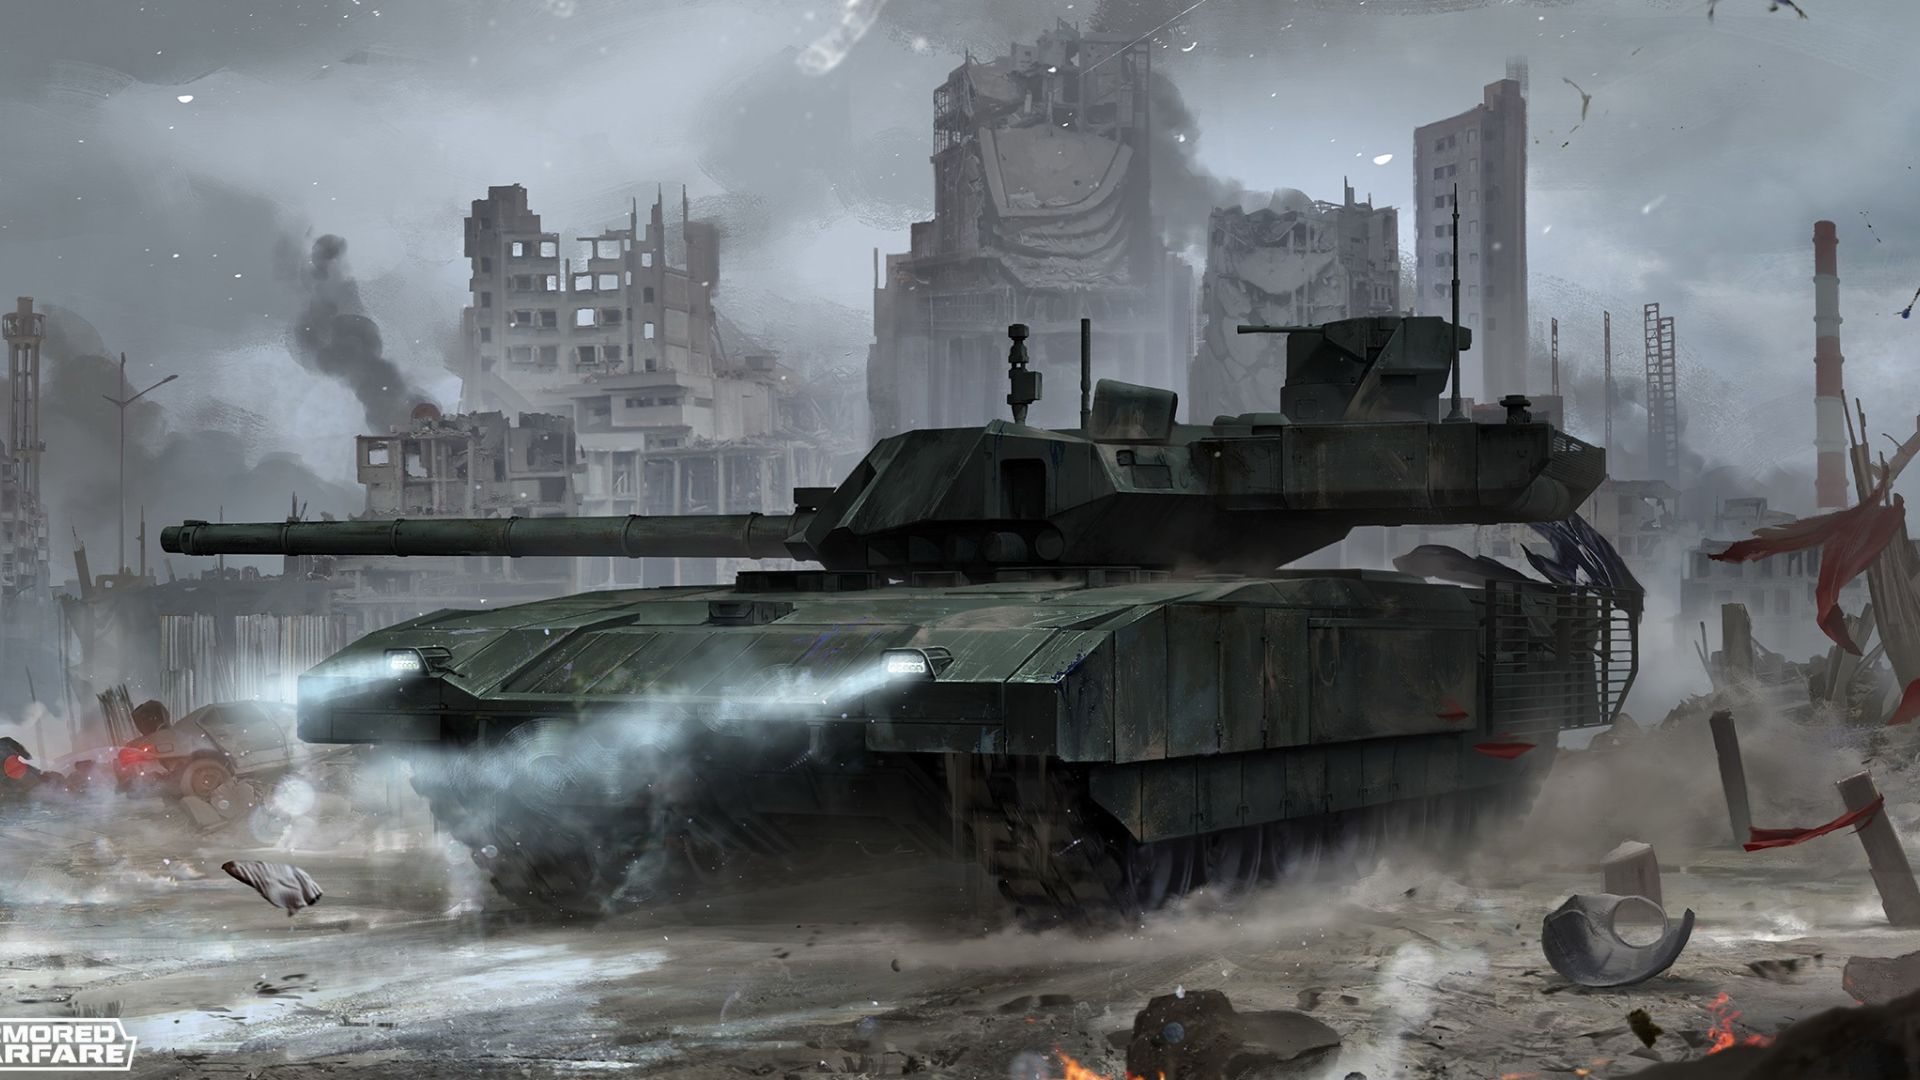 Desktop Wallpaper Armored Warfare, Online Game, Video Game, Tank, Ruined City, HD Image, Picture, Background, Uyllej